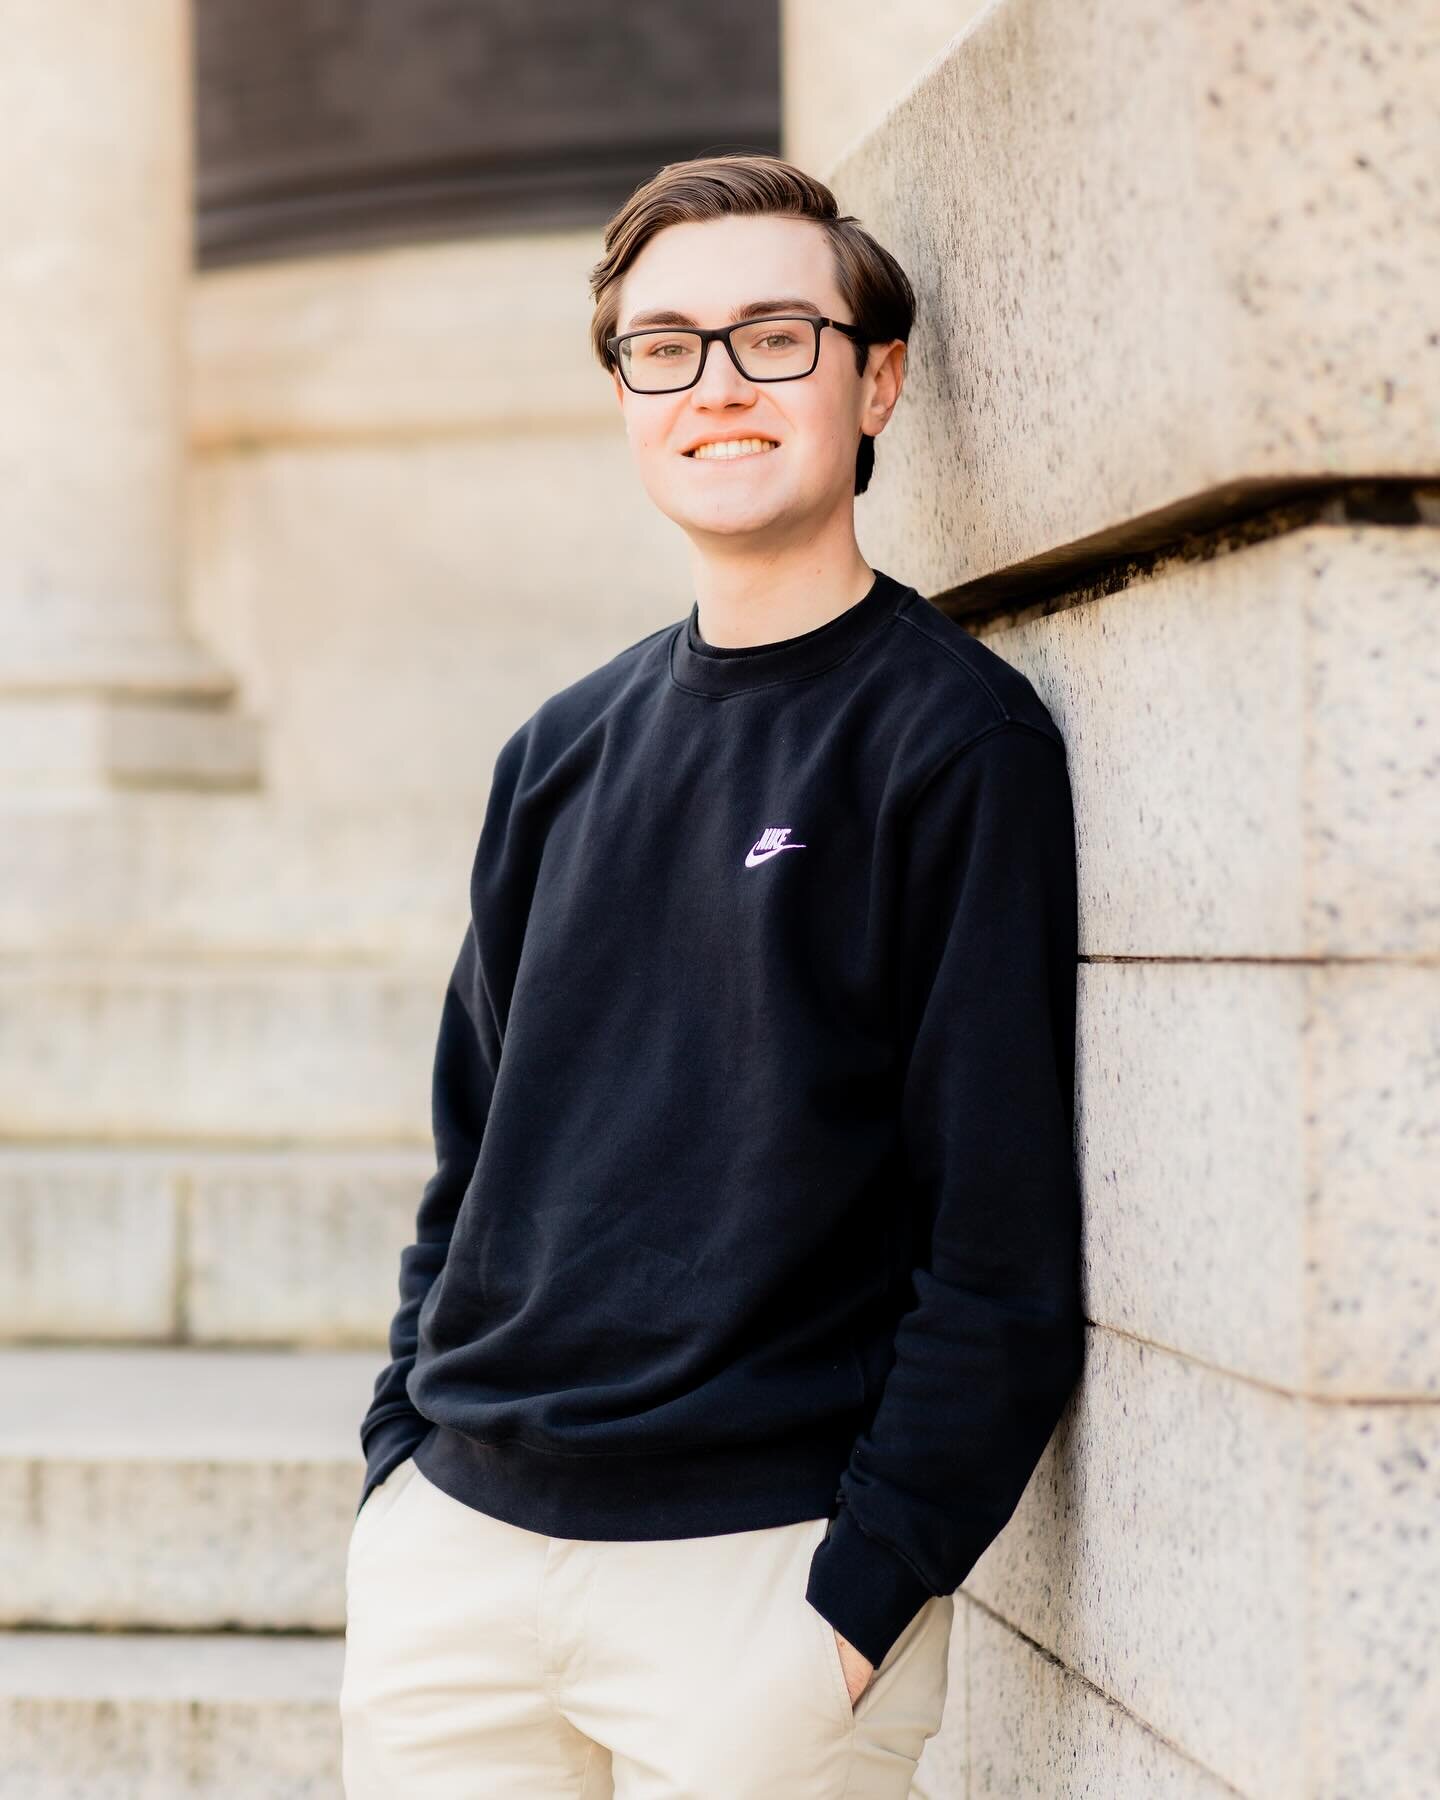 Noah // Silverdale // Class of 2024

Graduation is creeping up on the class of 2024! I hope everyone&rsquo;s spring semester of senior year is going well! 

&bull;
Chattanooga high school senior. Chattanooga photographer. Chattanooga family photograp